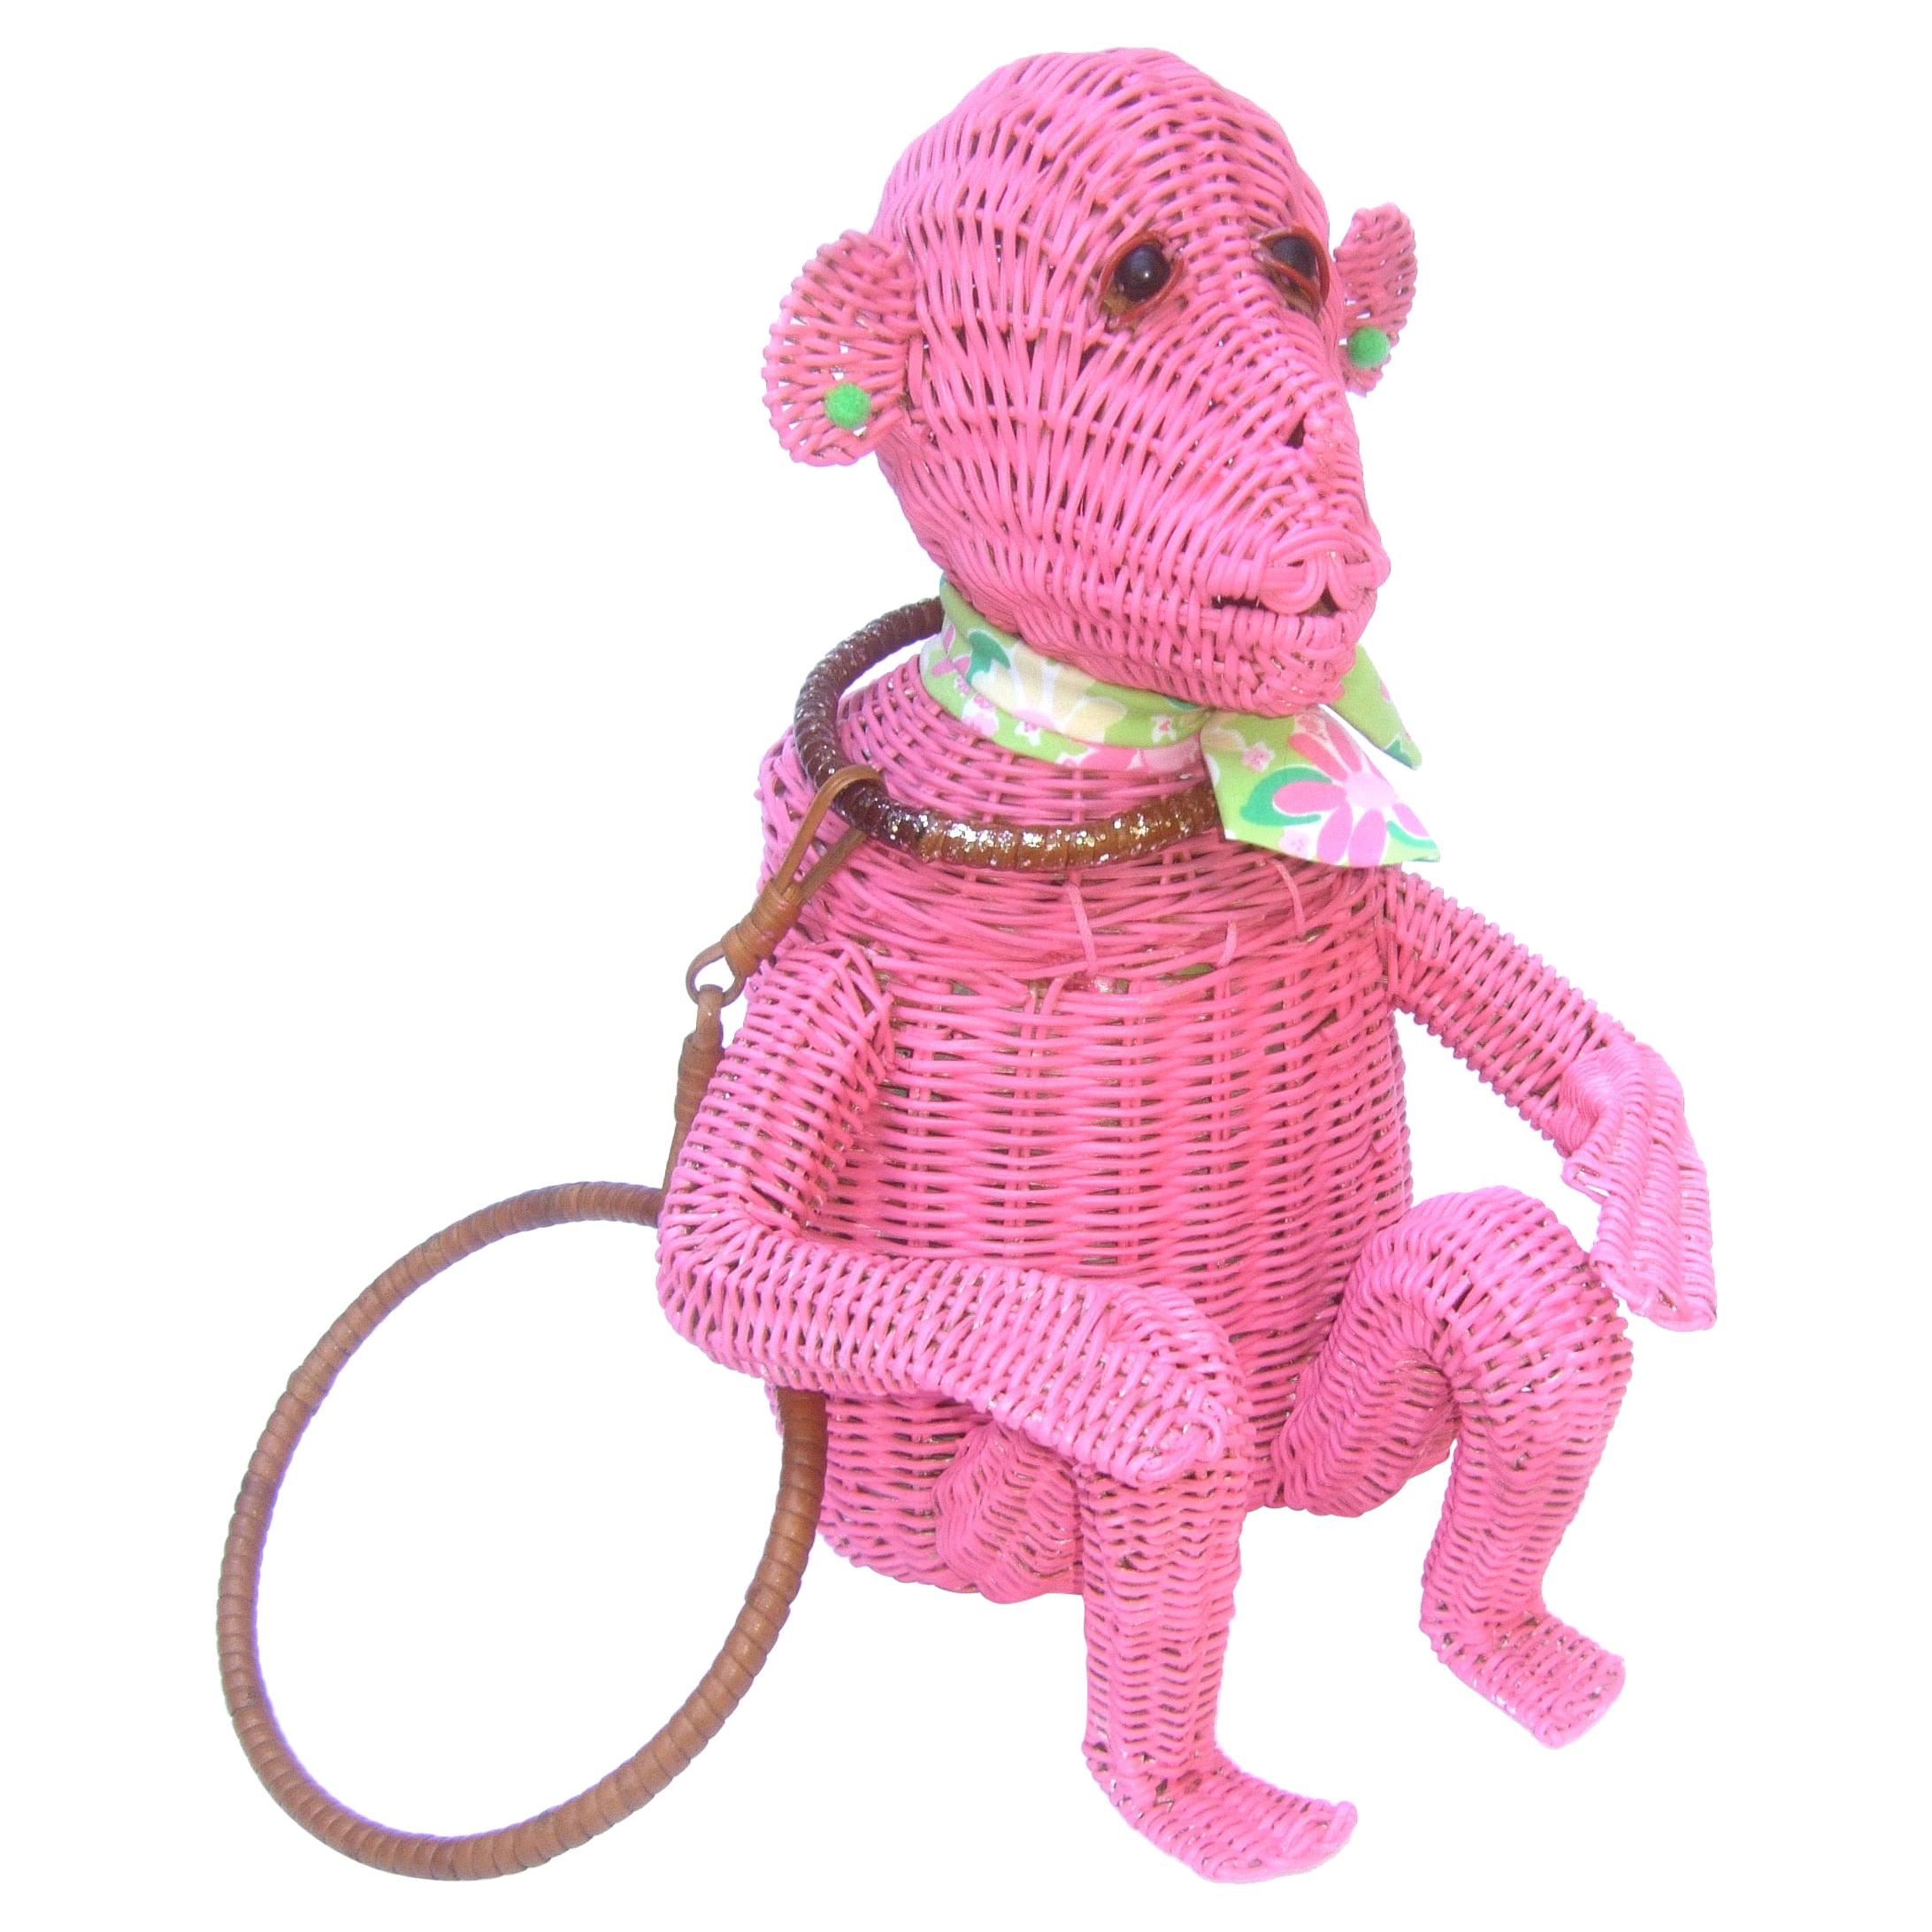 Whimsical Vintage Wicker Monkey Handbag With Lilly Pulitzer Fabric c 1950's 